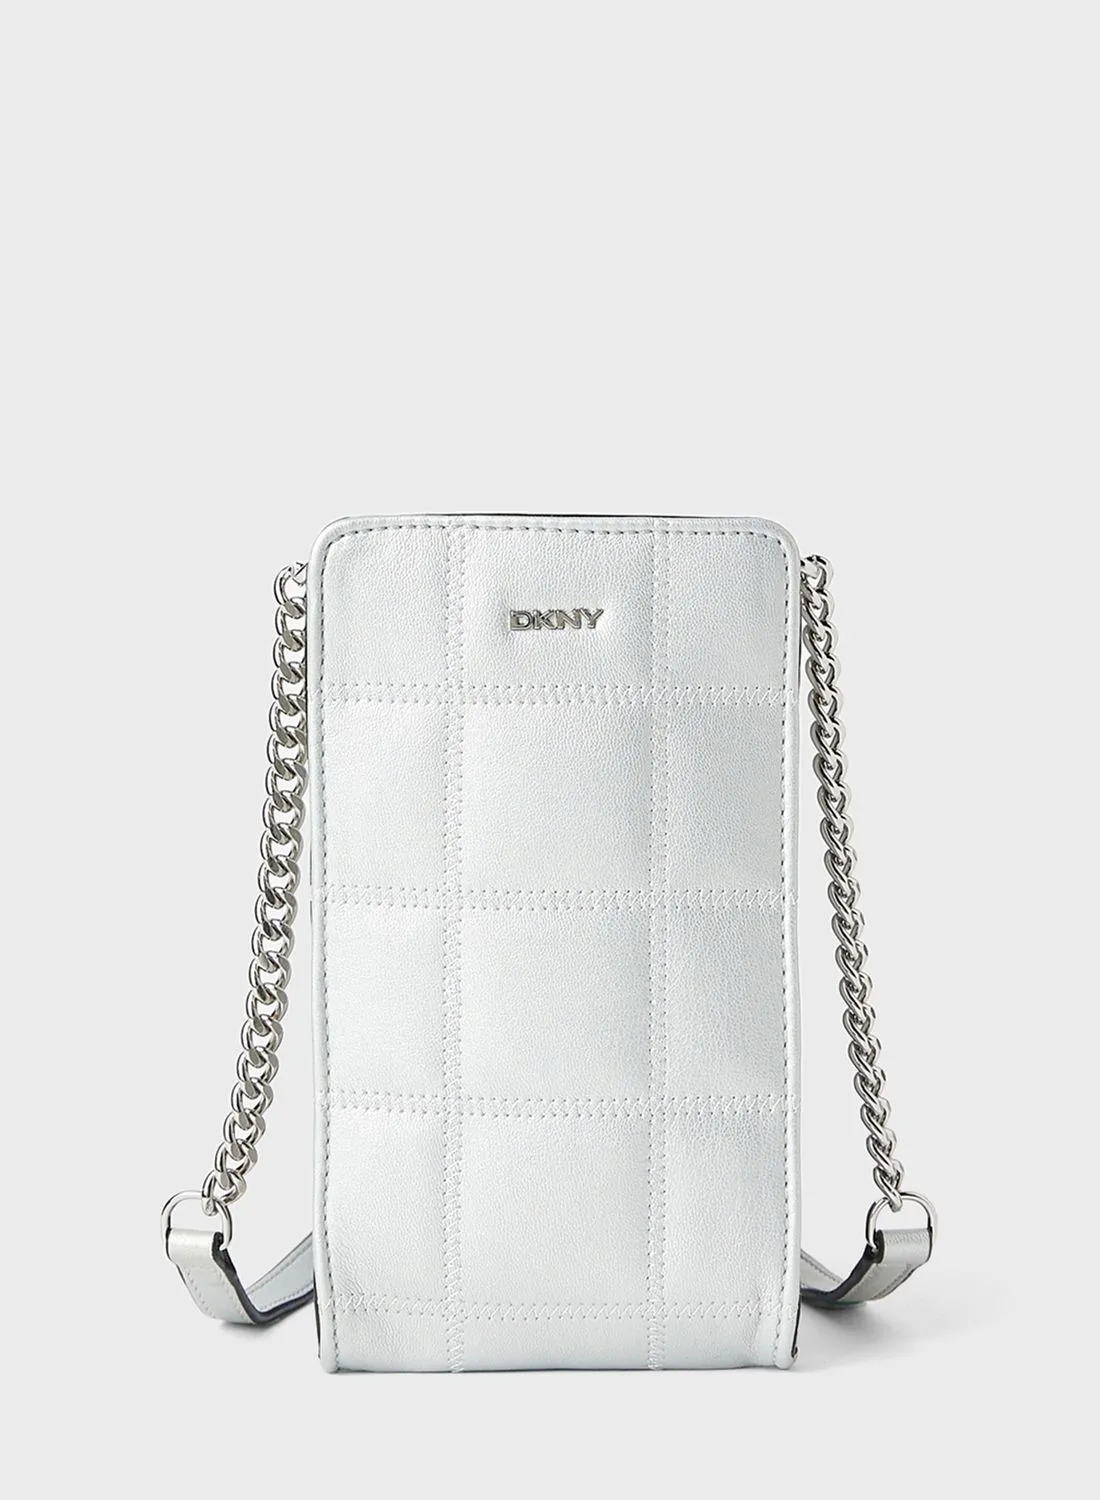 DKNY Quilted Phone Crossbody Bag S